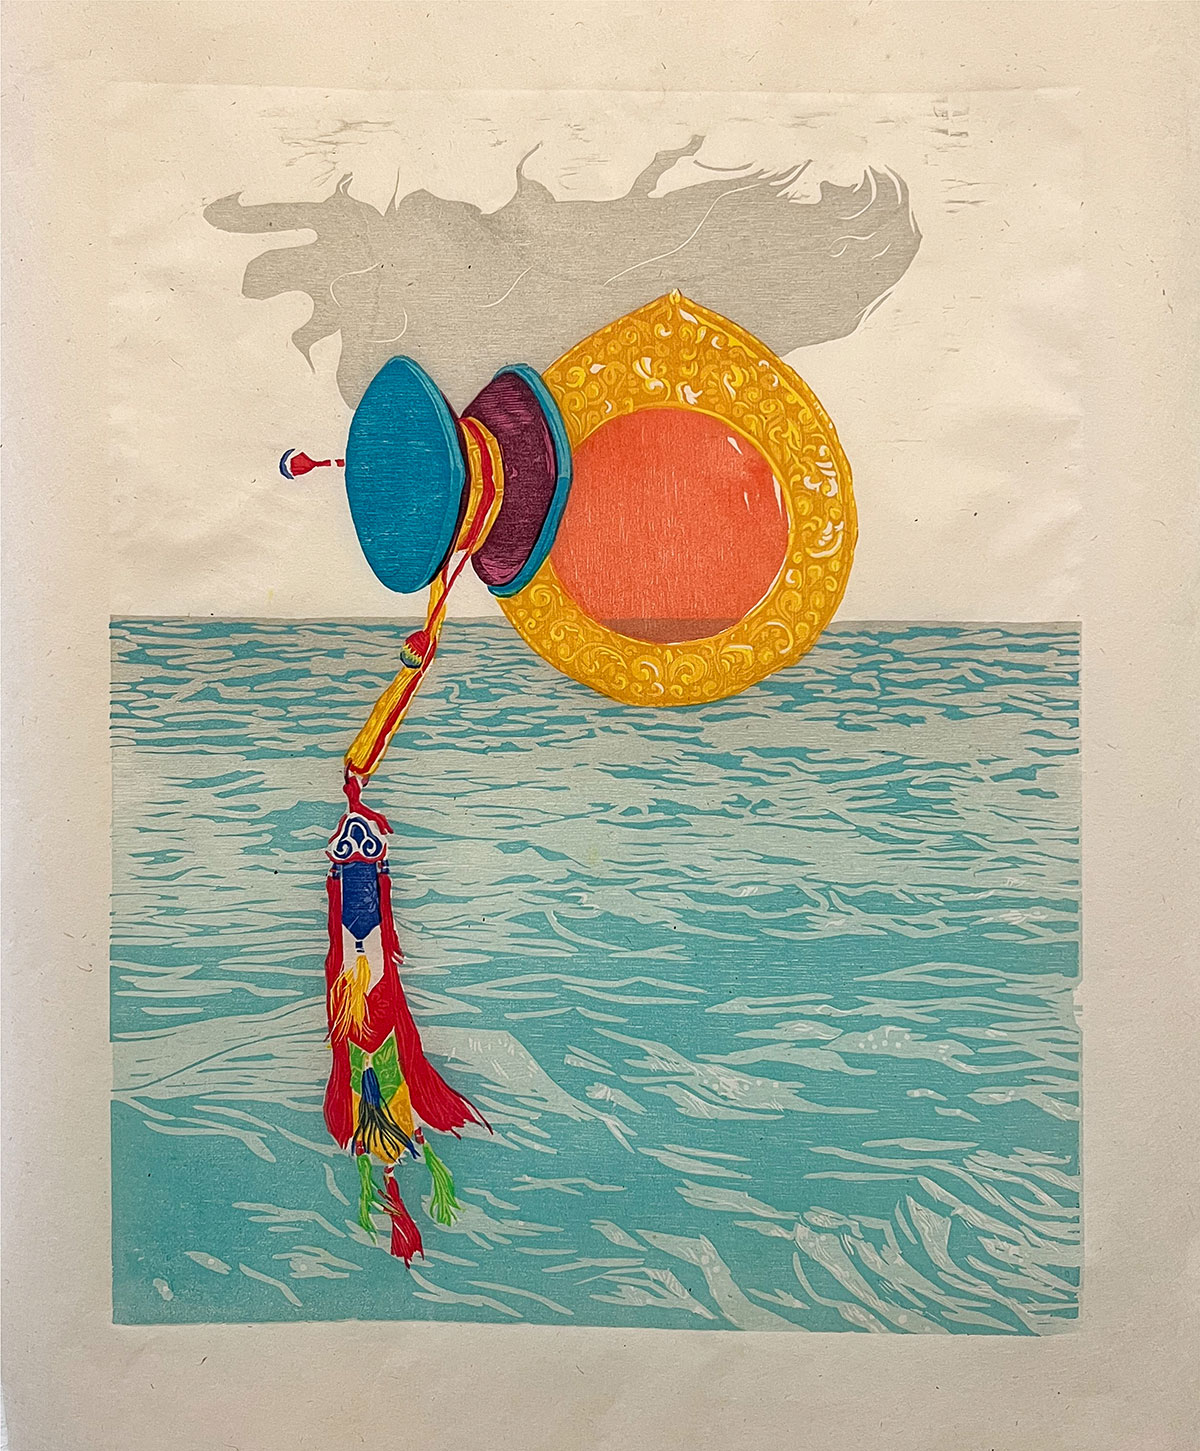 A mirror in yellow-orange and a hand drum in blue and maroon. A tassel is attached to the hand-drum. A blue body of water and a gray cloud are in the background. 